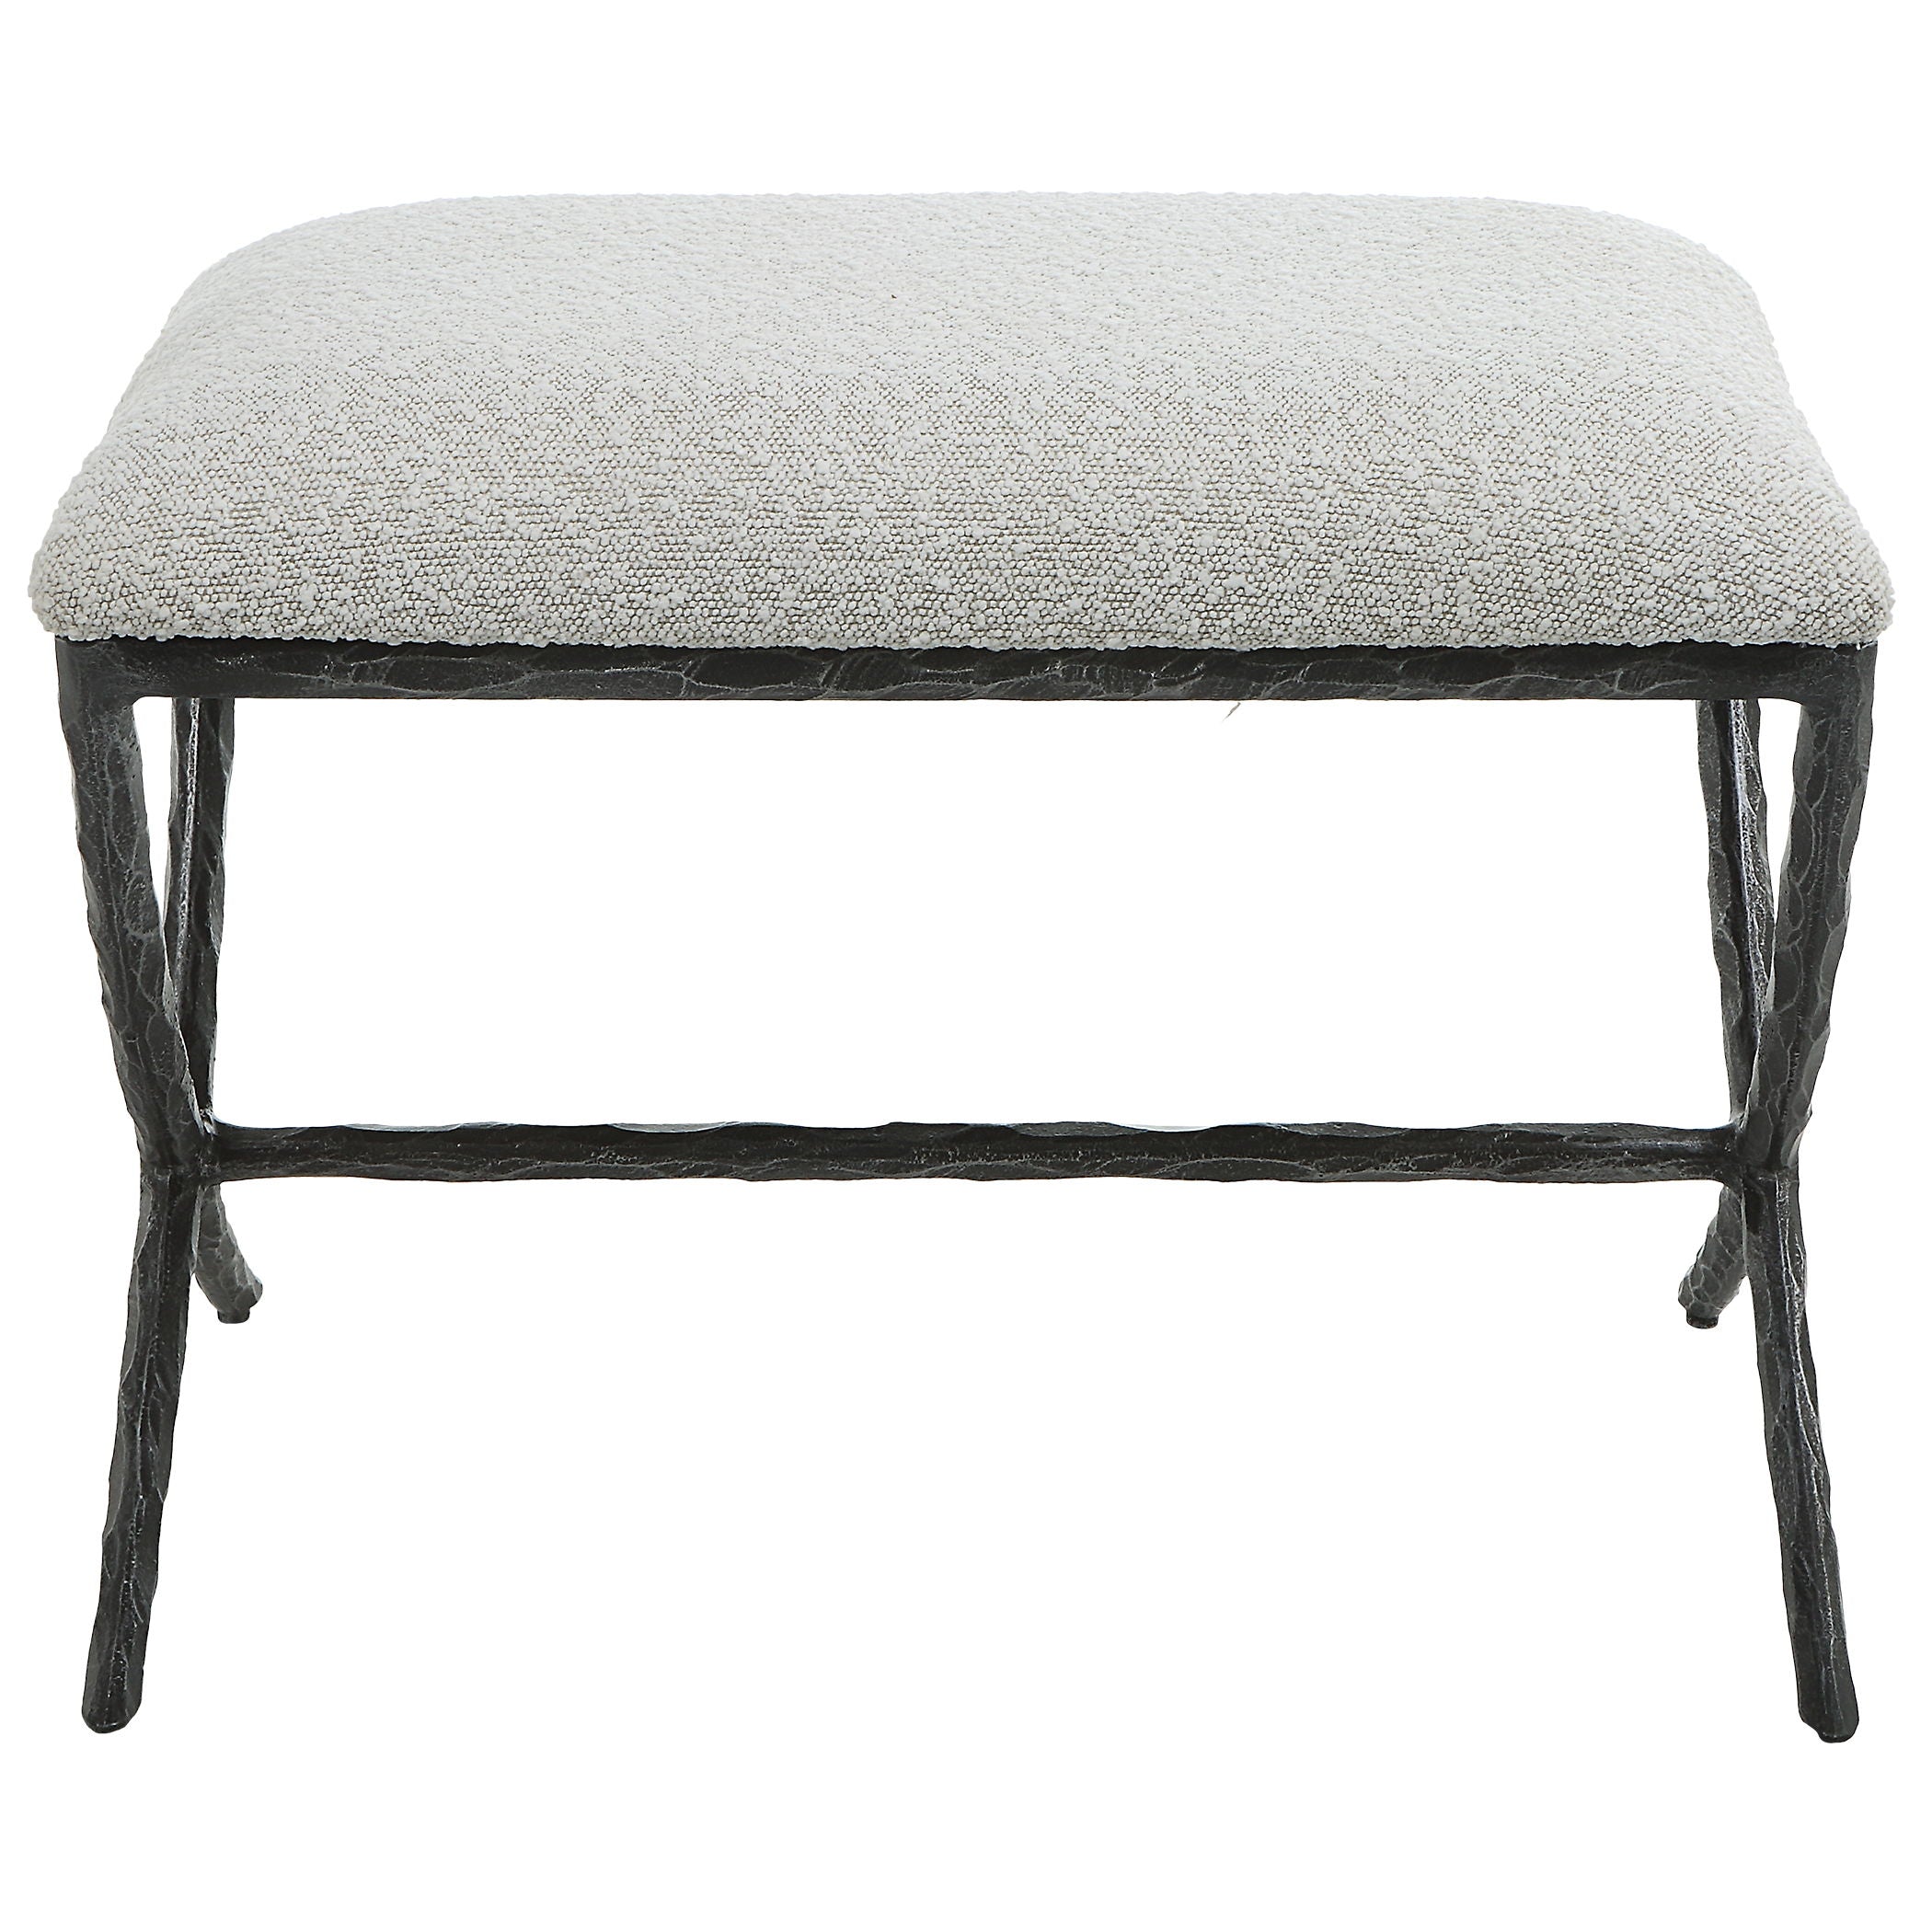 Brisby - Gray Fabric Small Bench